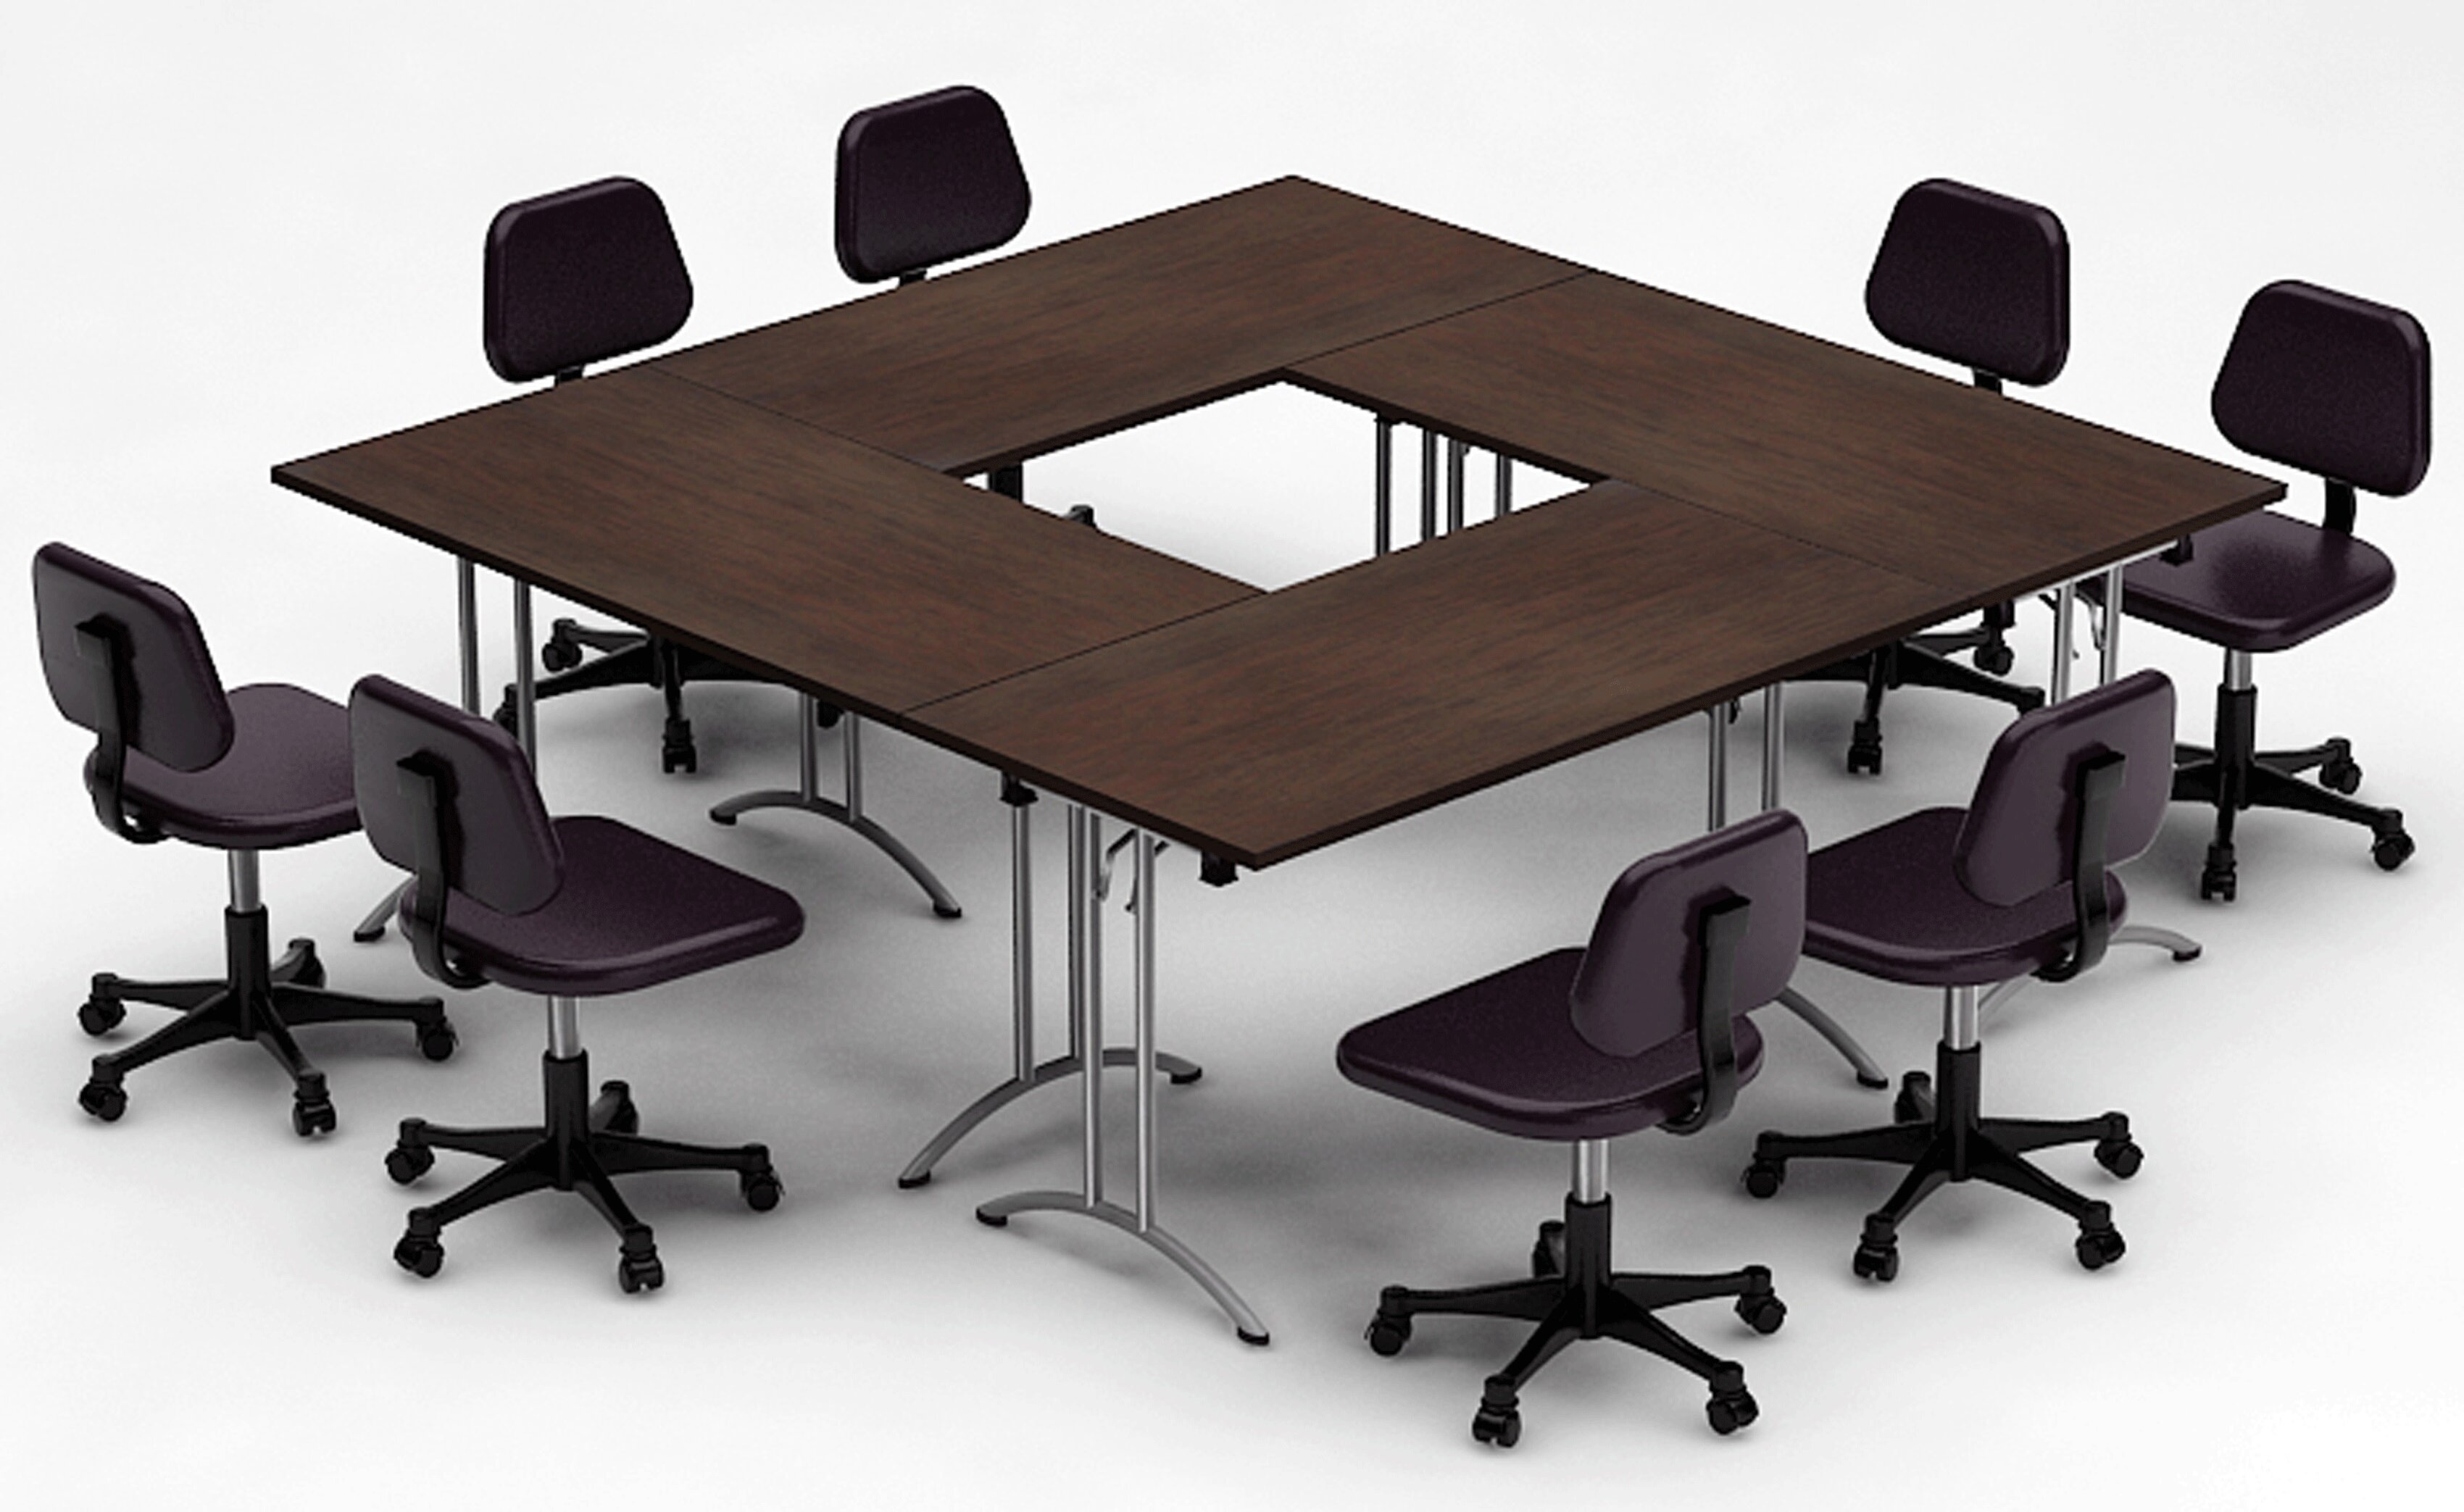 Team Tables Meeting Seminar 4 Piece Square Conference Table Set Wayfair